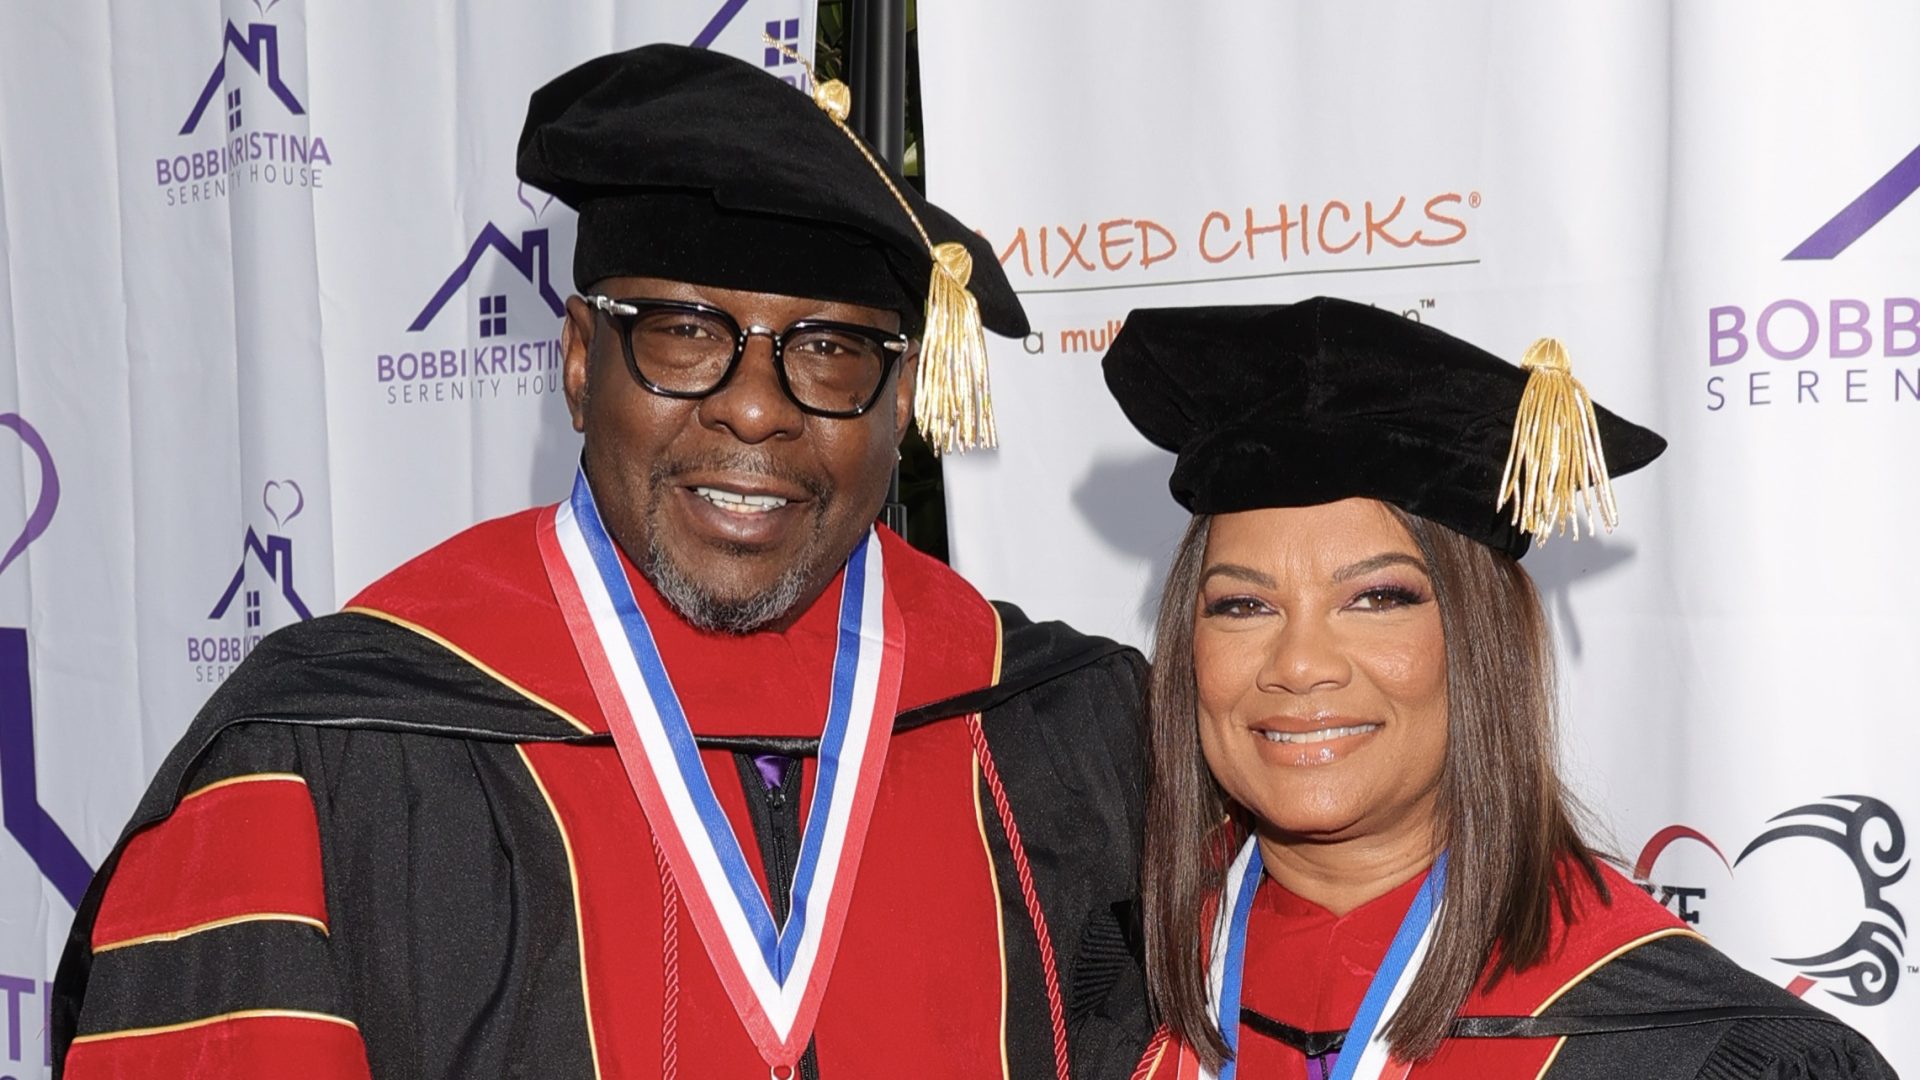 Love To See It! Bobby Brown & His Wife Alicia Receive Honorary Doctorate Degrees (Video) thumbnail